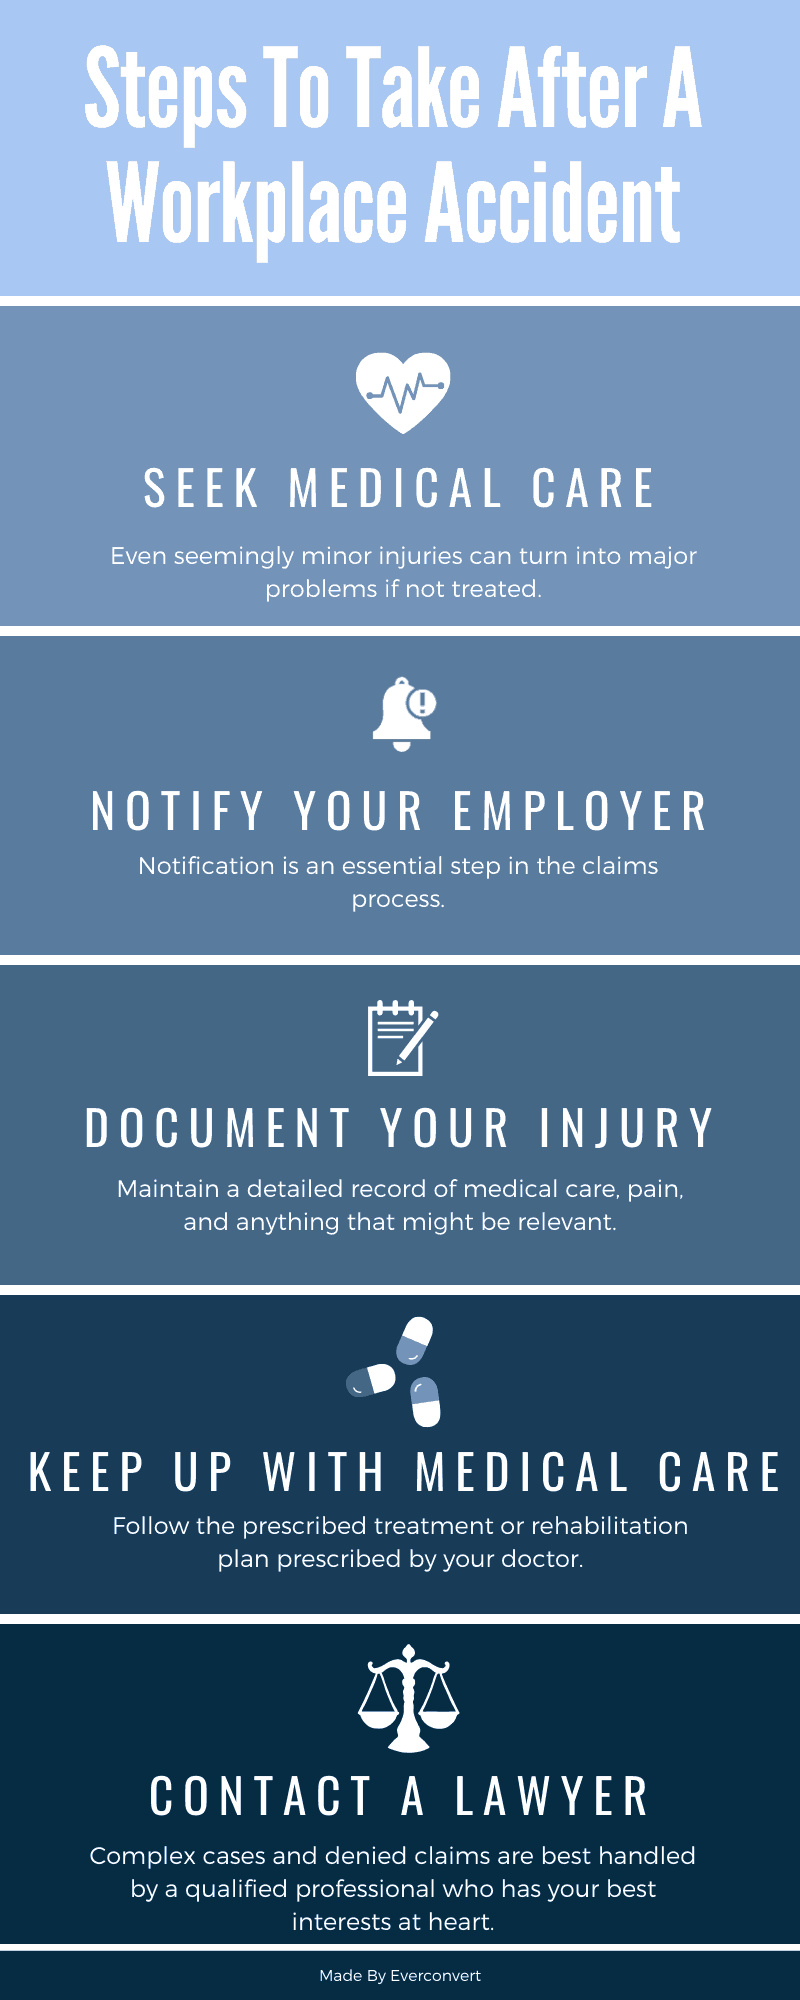 Steps to take after a workplace accident info graphic